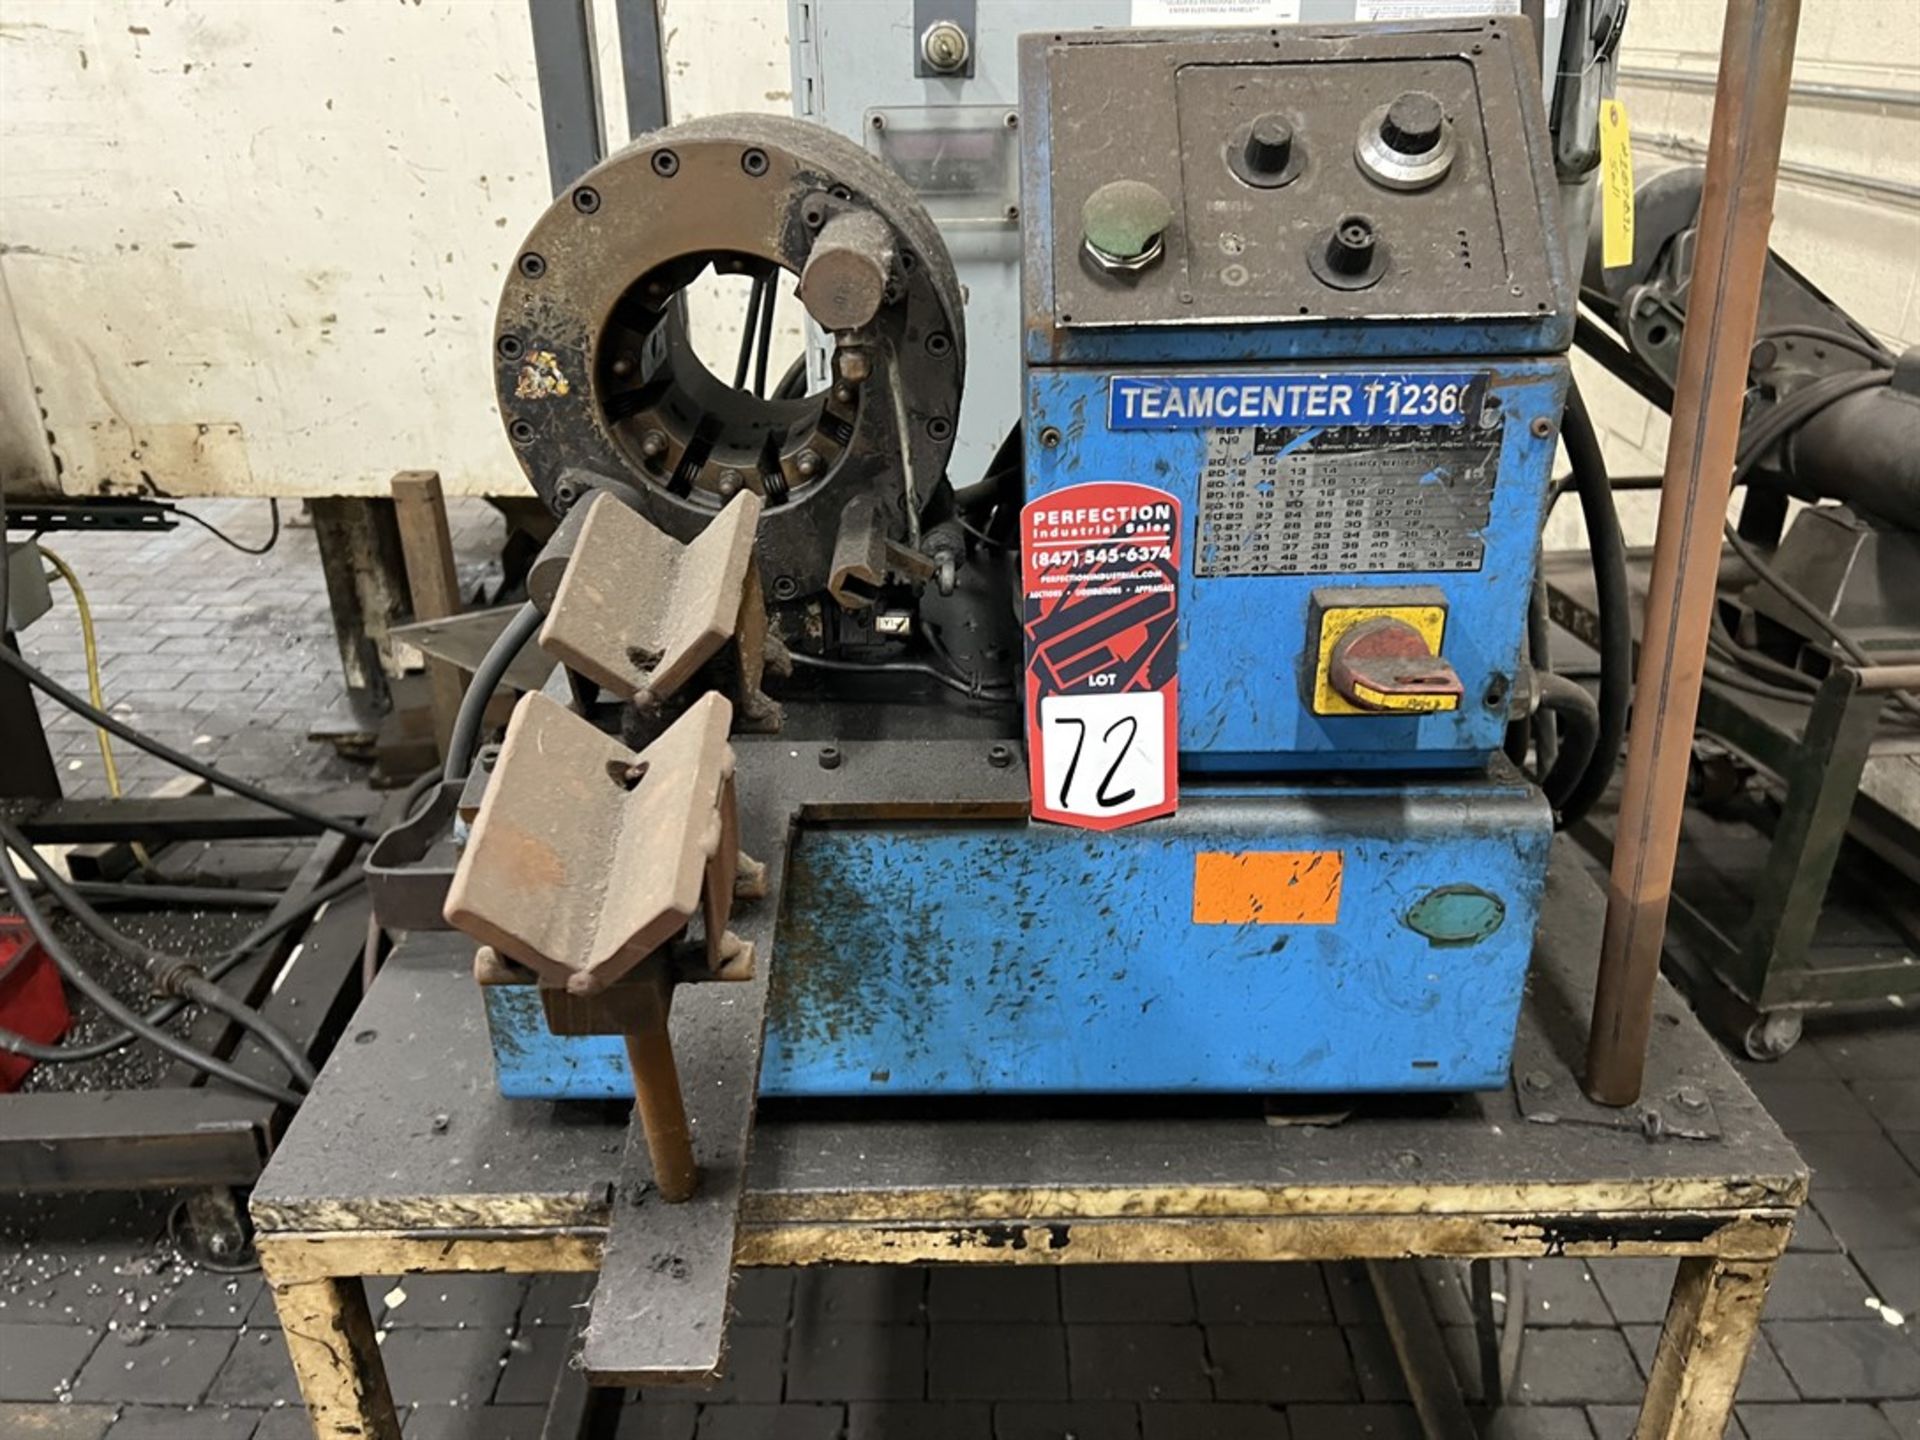 FINN-POWER P20MS/1 Hydraulic Crimper, s/n 795601, (Condition Unknown) - Image 2 of 6